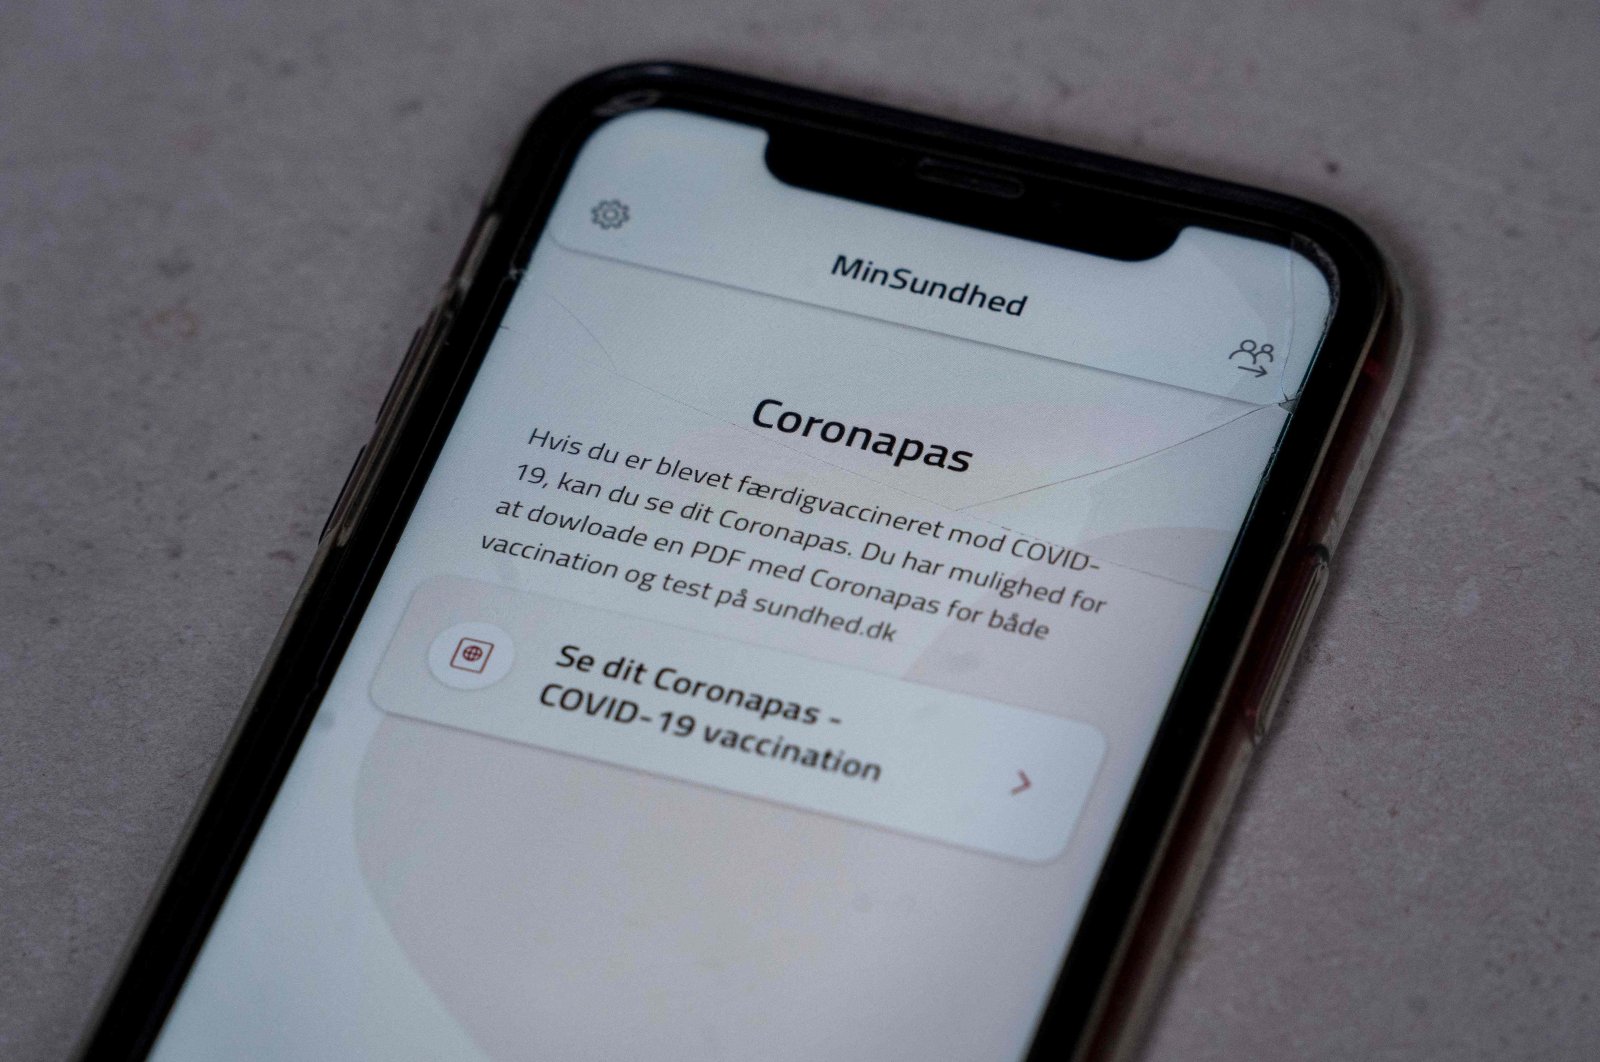 A smartphone with the MinSundhed app and a Corona passport link, Copenhagen, Denmark, March 23, 2021. (AFP Photo)